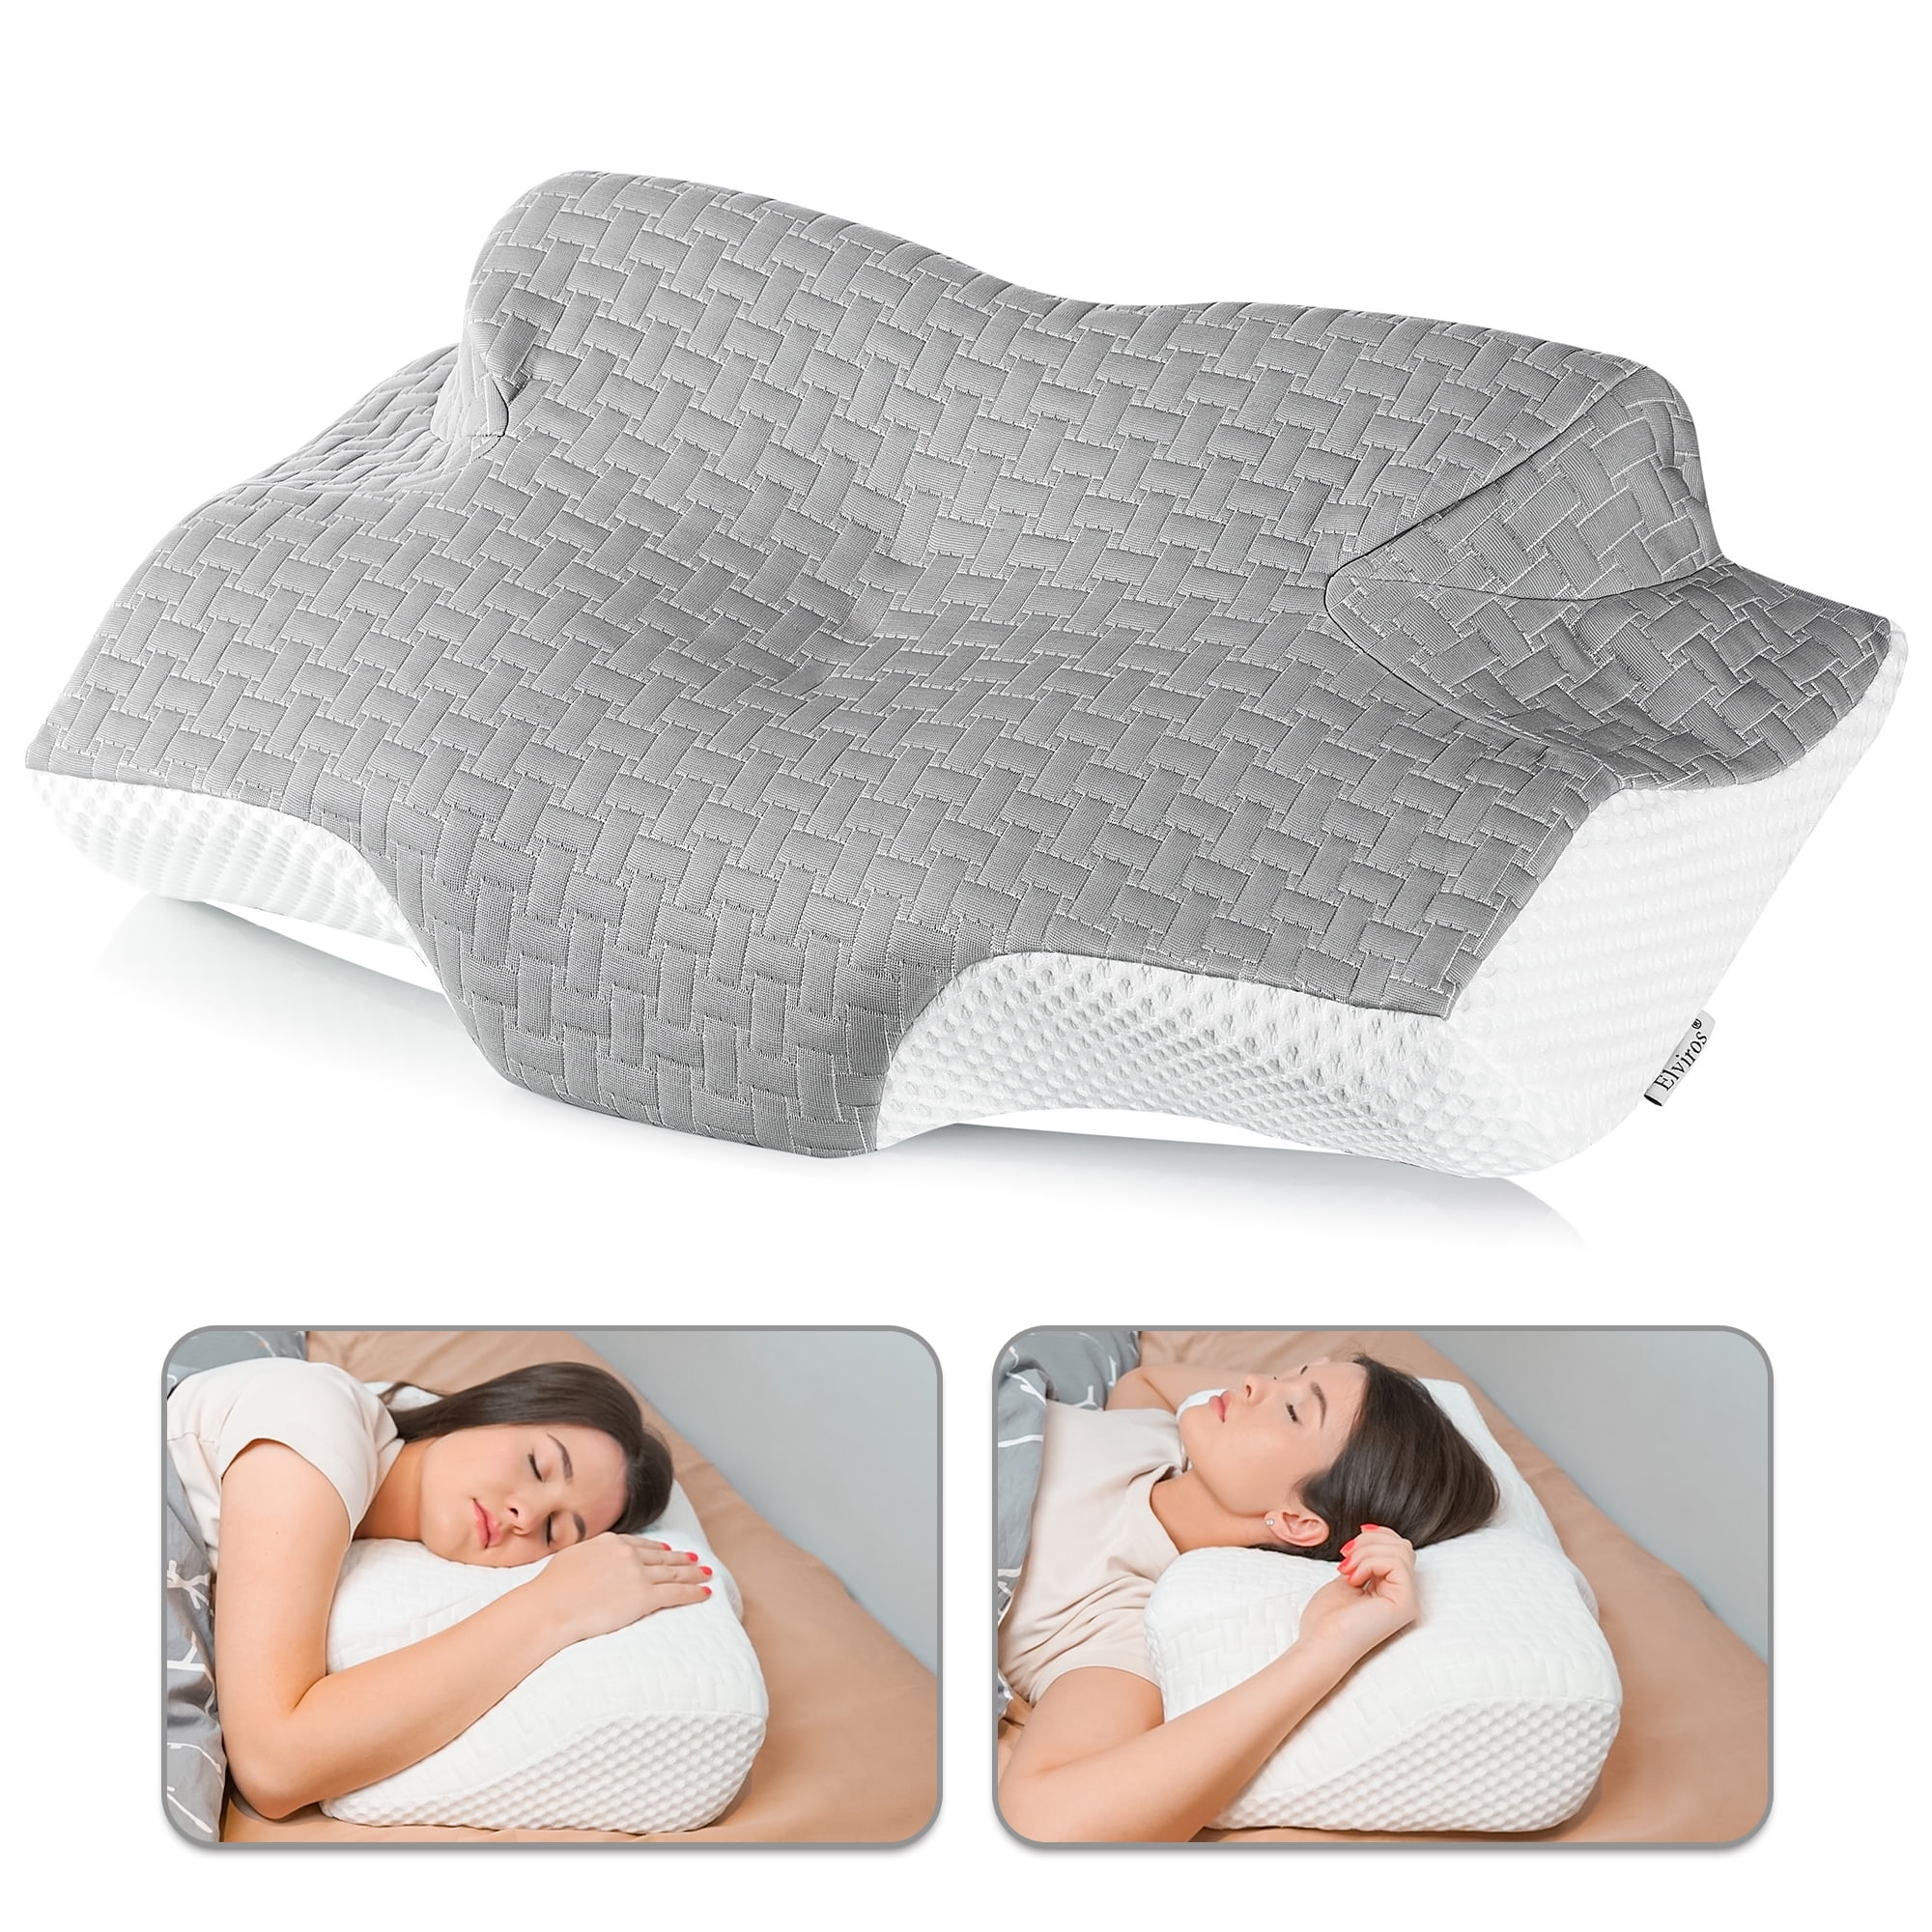 Contour Memory Foam Pillow for Neck Shoulder Pain Relief Side Sleeper Sleeping 